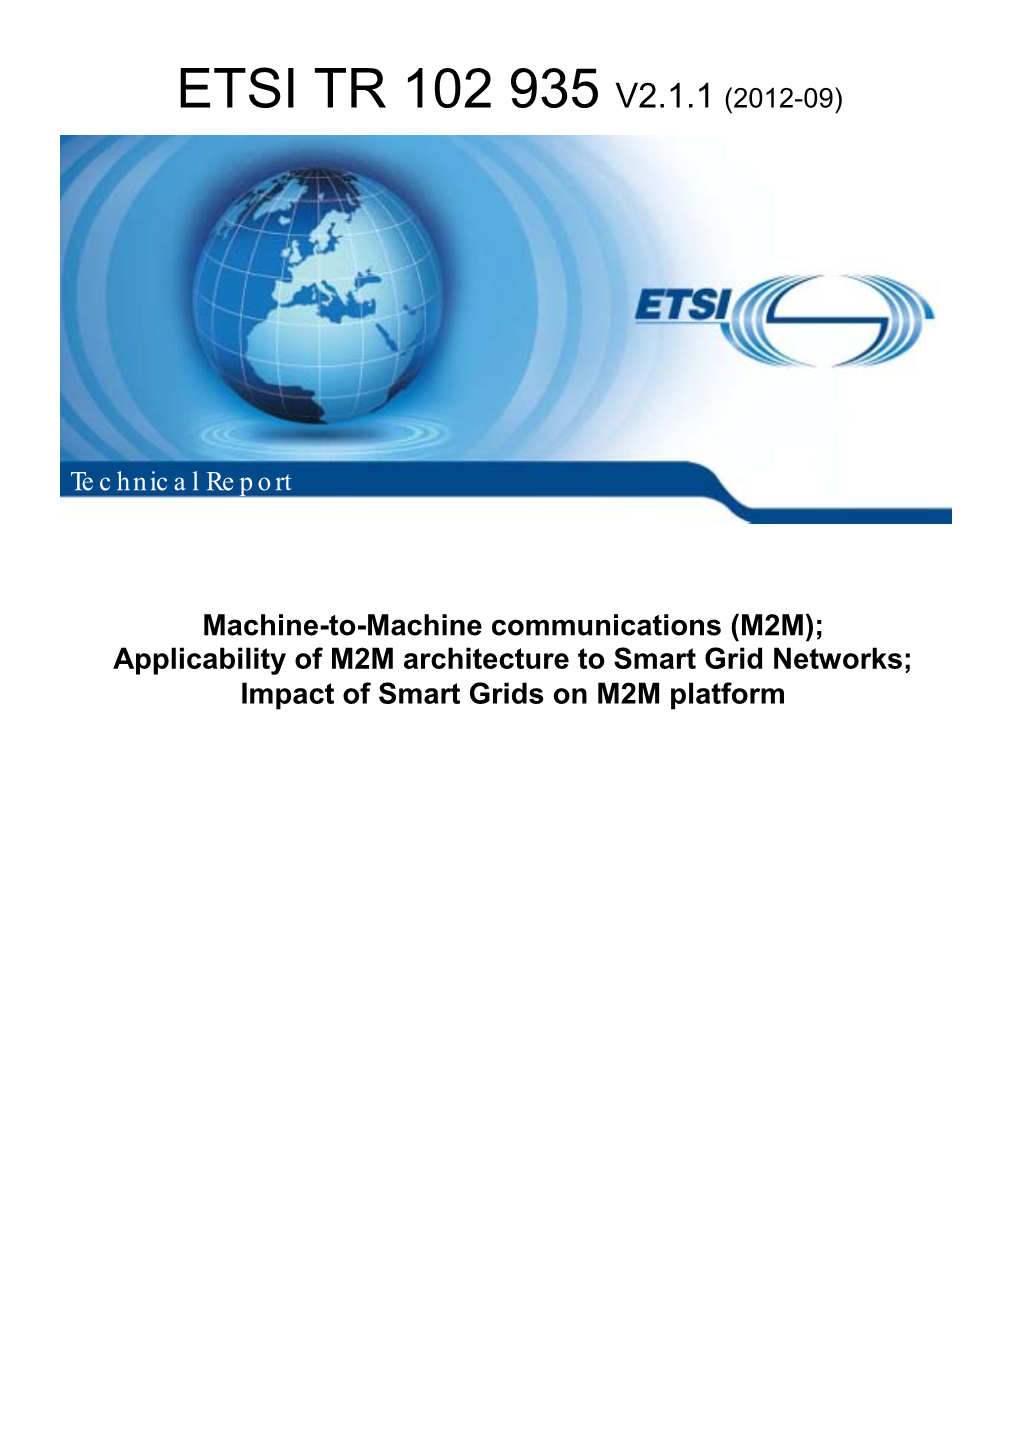 M2M); Applicability of M2M Architecture to Smart Grid Networks; Impact of Smart Grids on M2M Platform